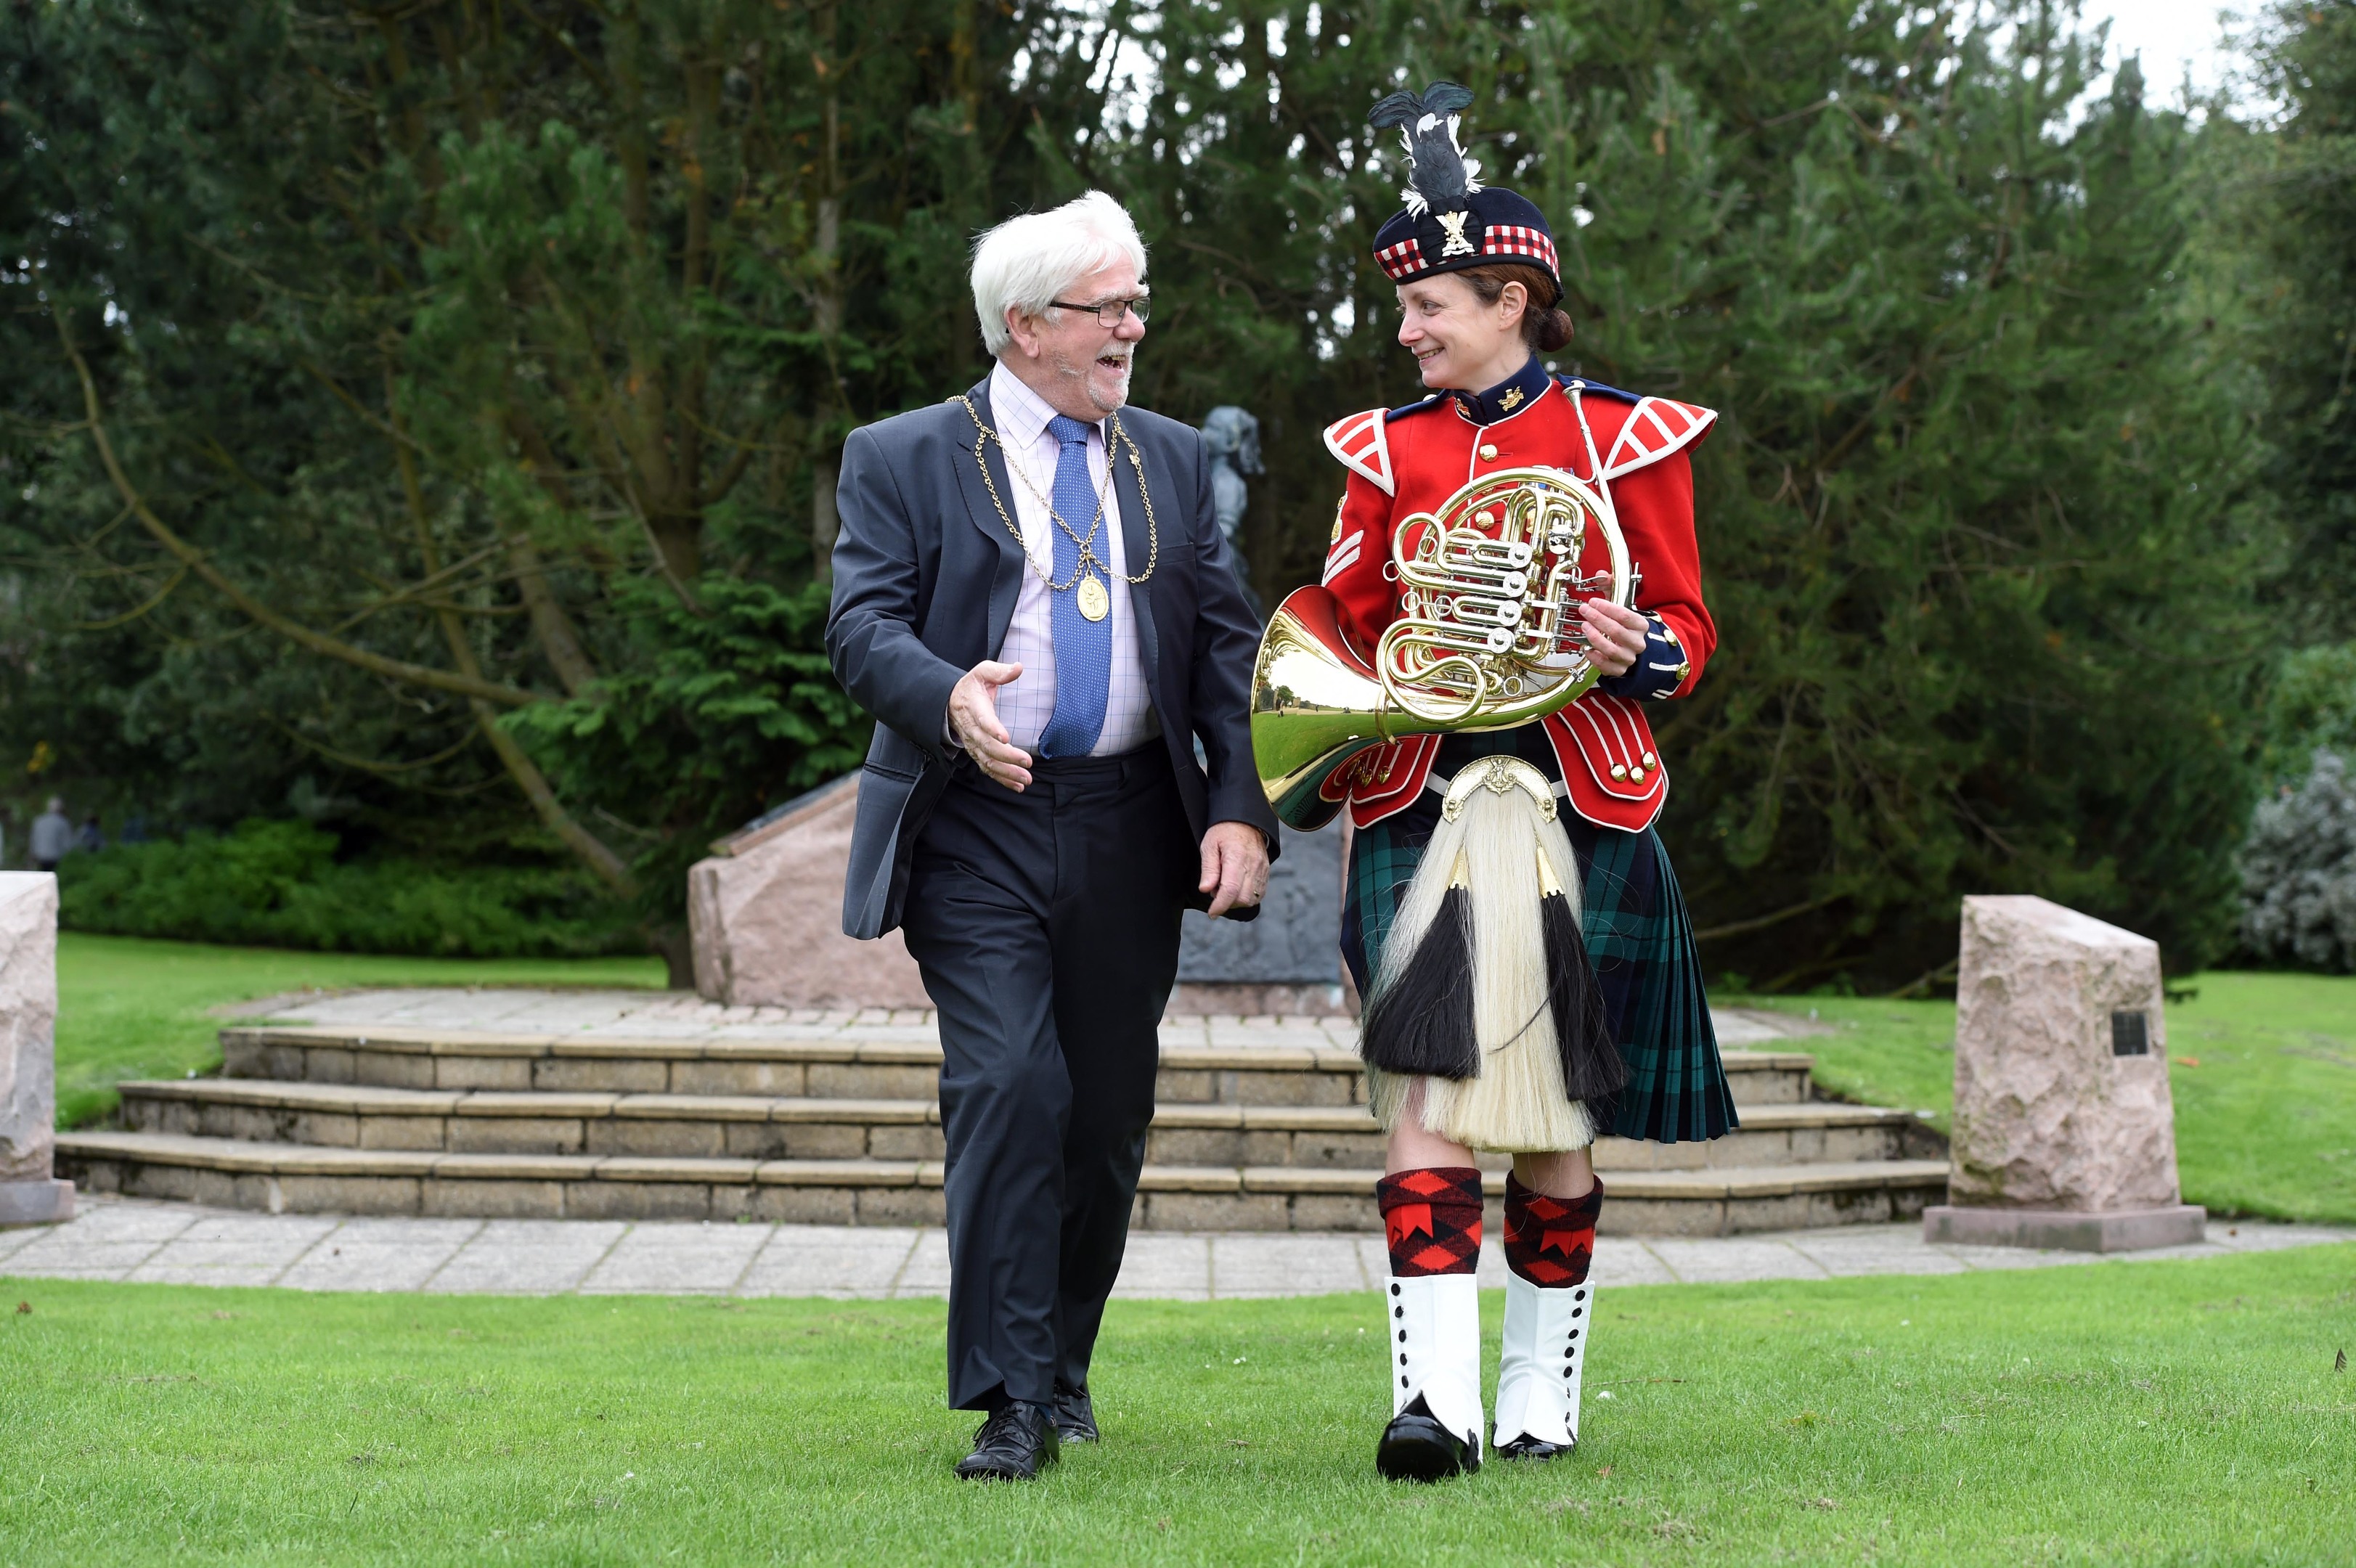 Perth and Kinross Provost Dennis Melloy with Corporal Joanne Ward.